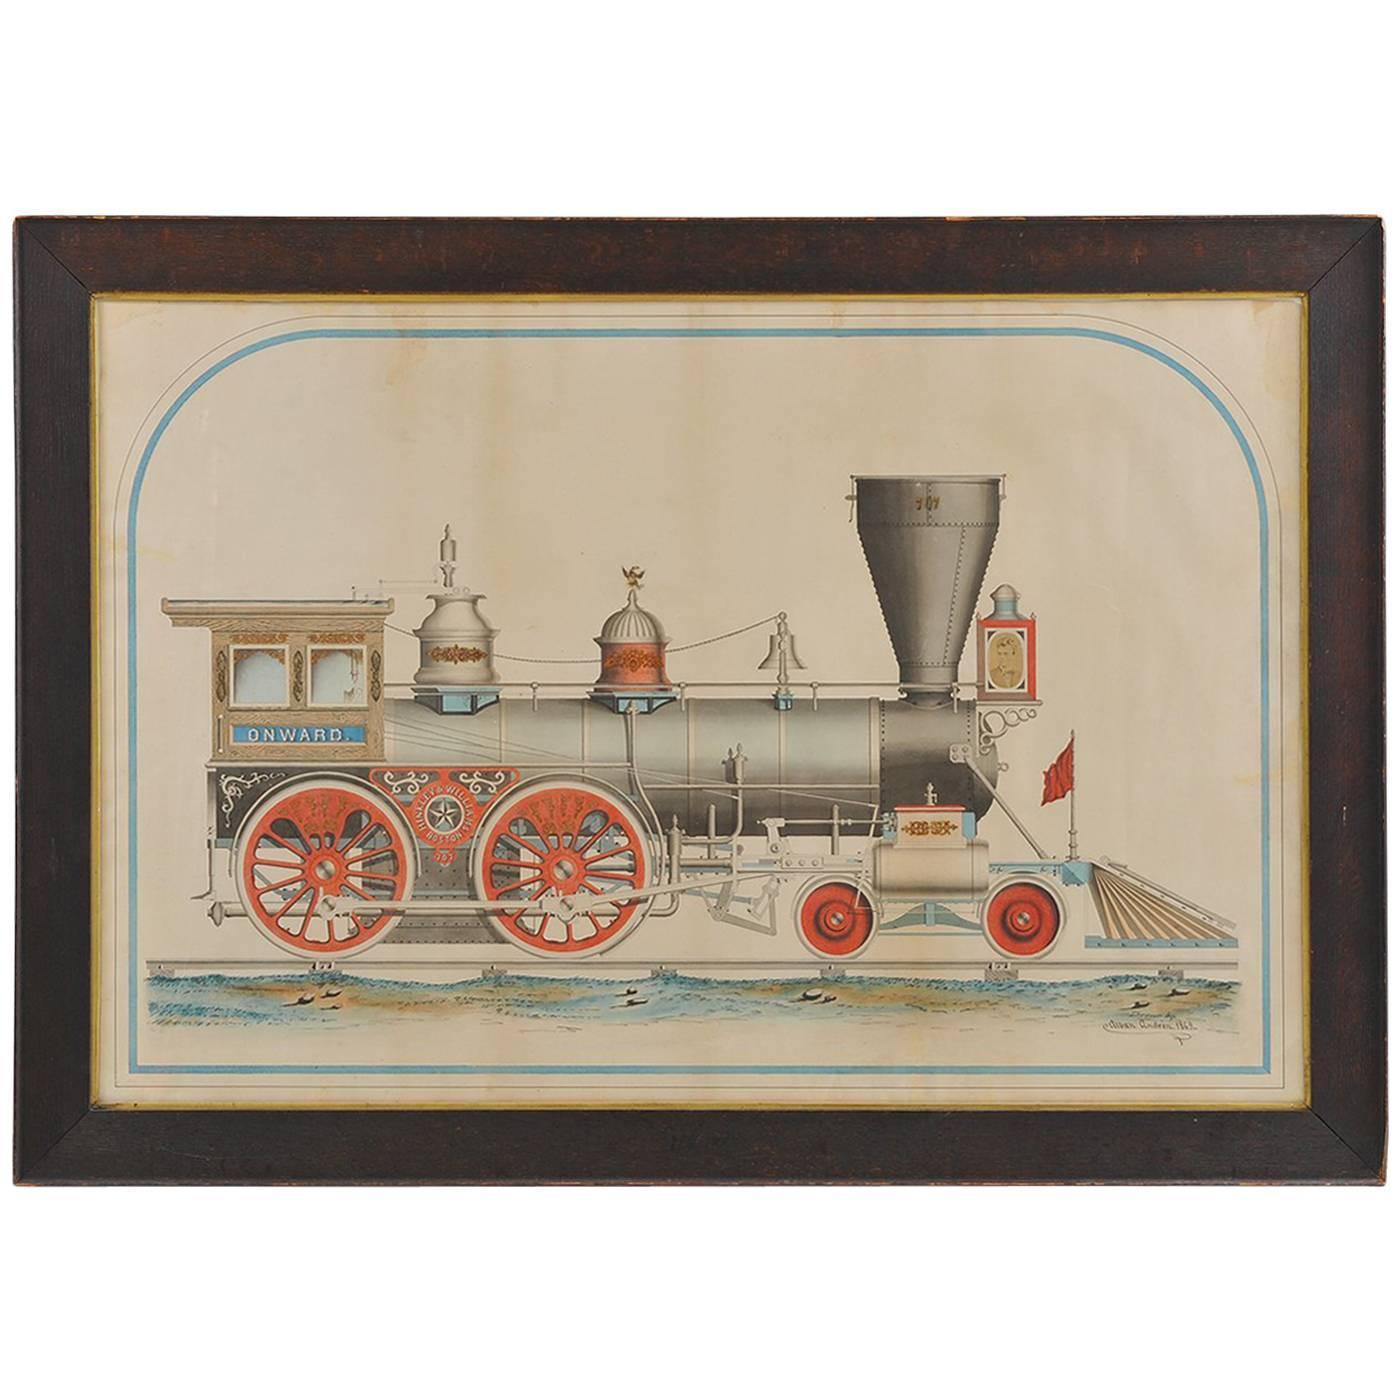 Rare and Important Large-Scale Drawing of the "Onward, Locomotive Engine"